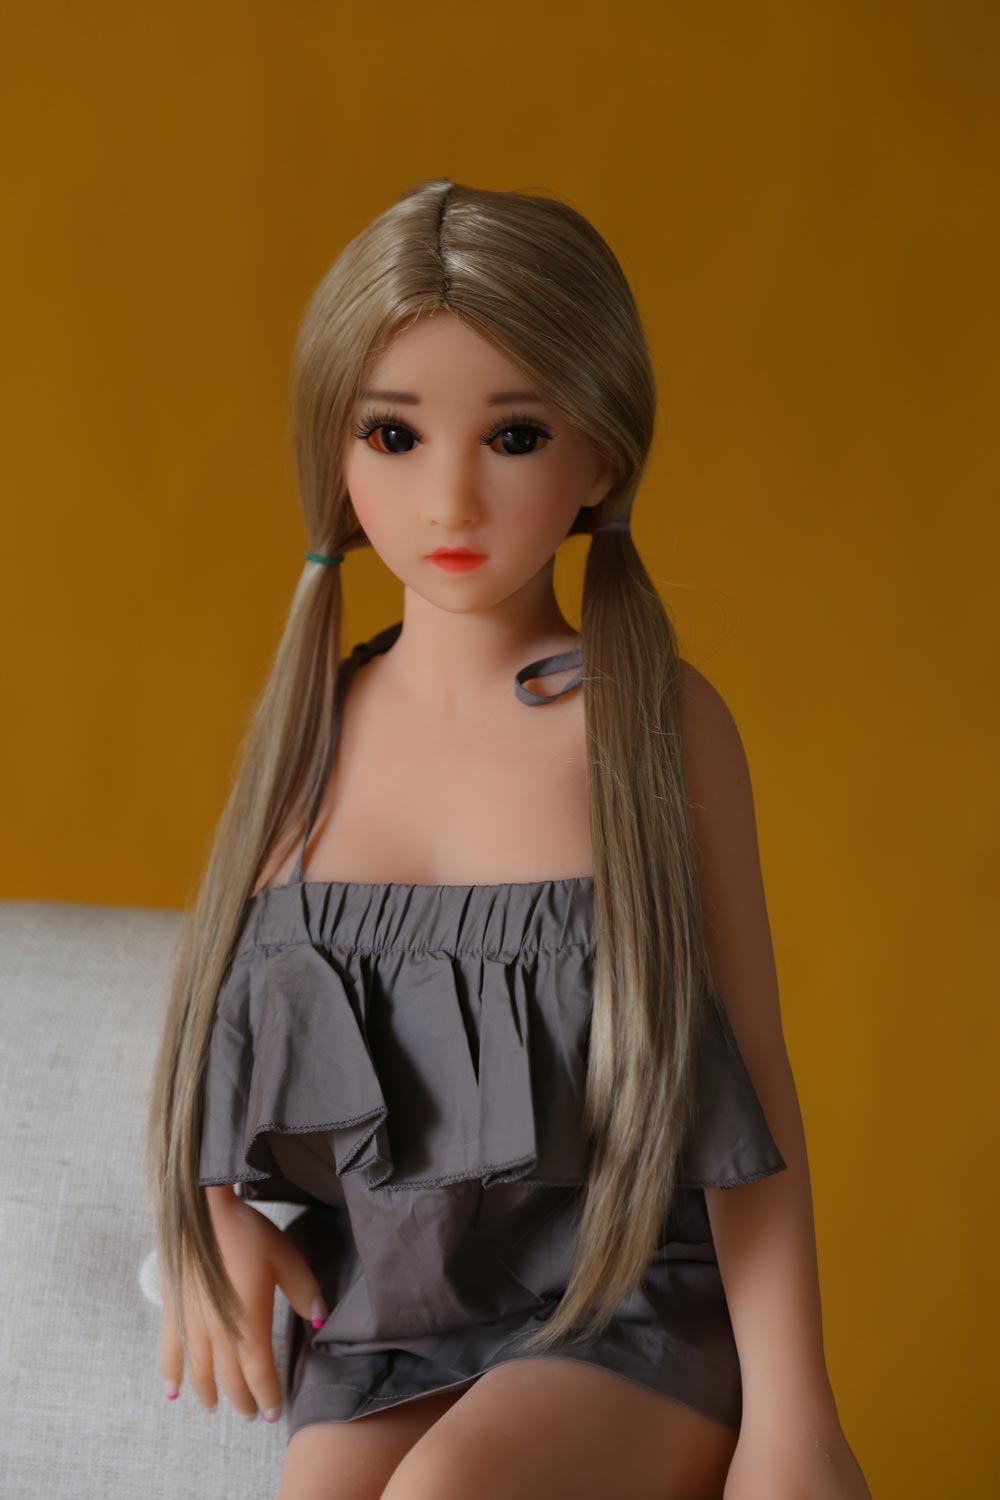 Blond-haired mini sex doll in a suspender skirt